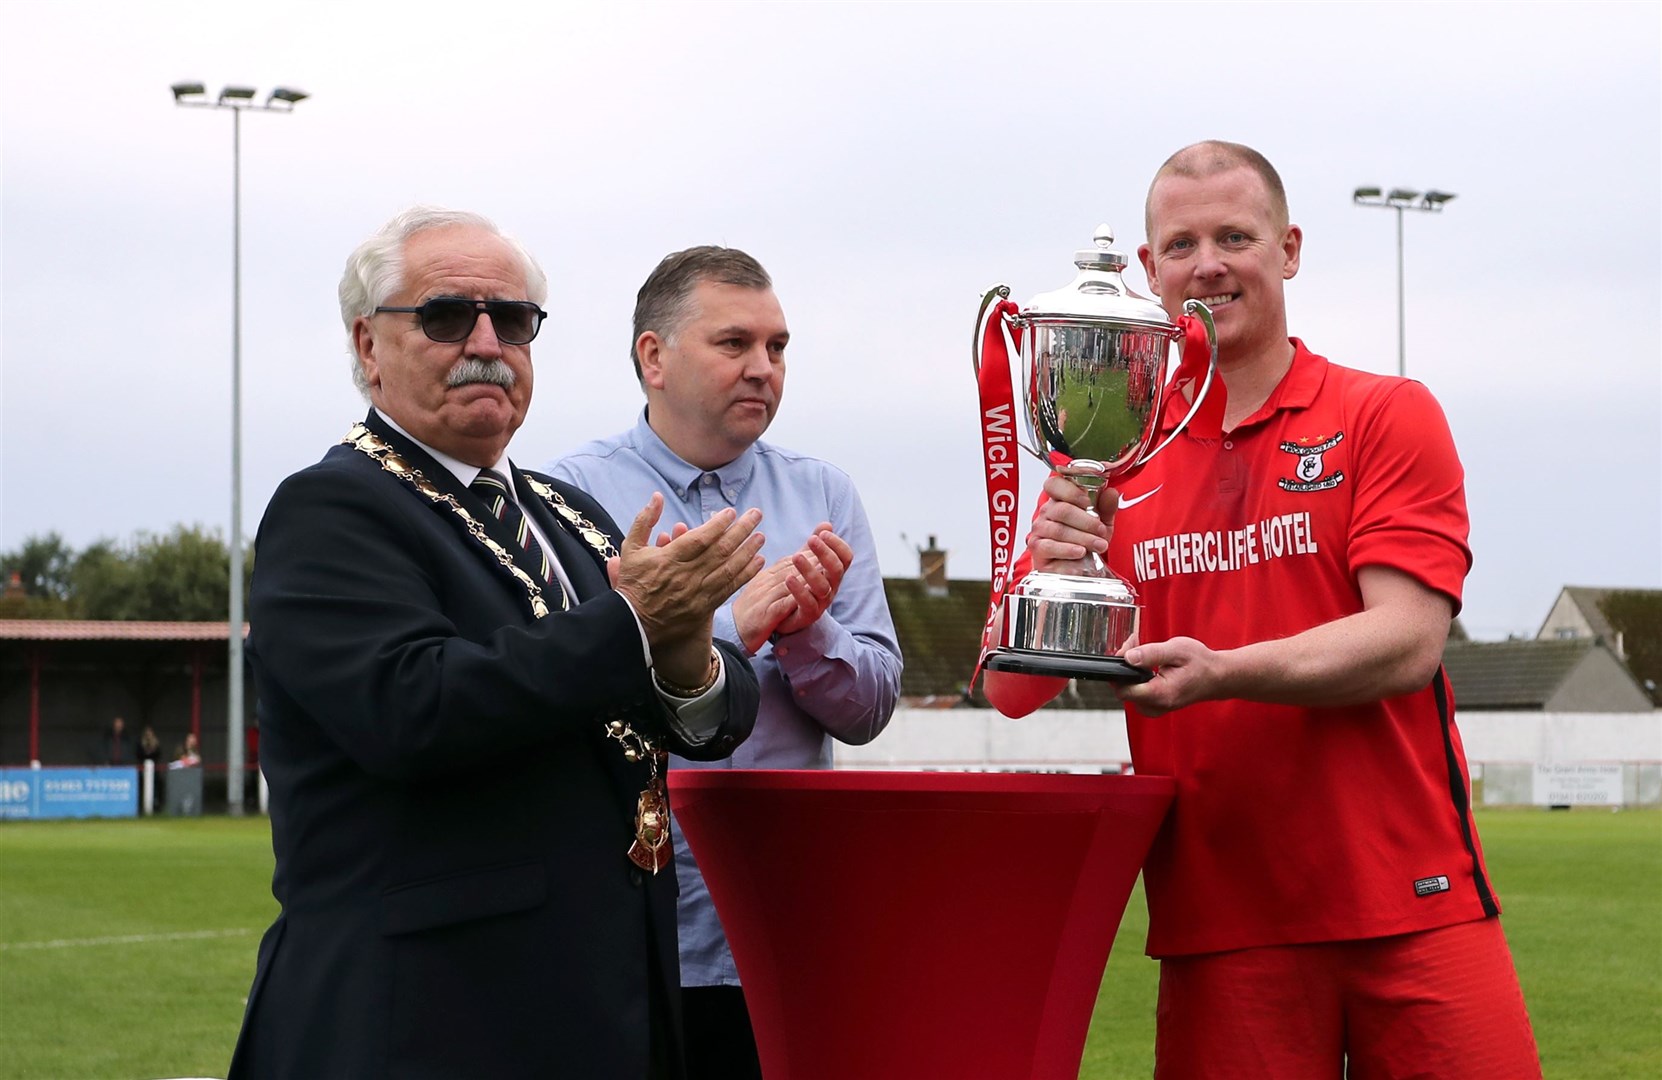 Wick Groats defeated Avoch in the last Highland Amateur Cup final in 2019.